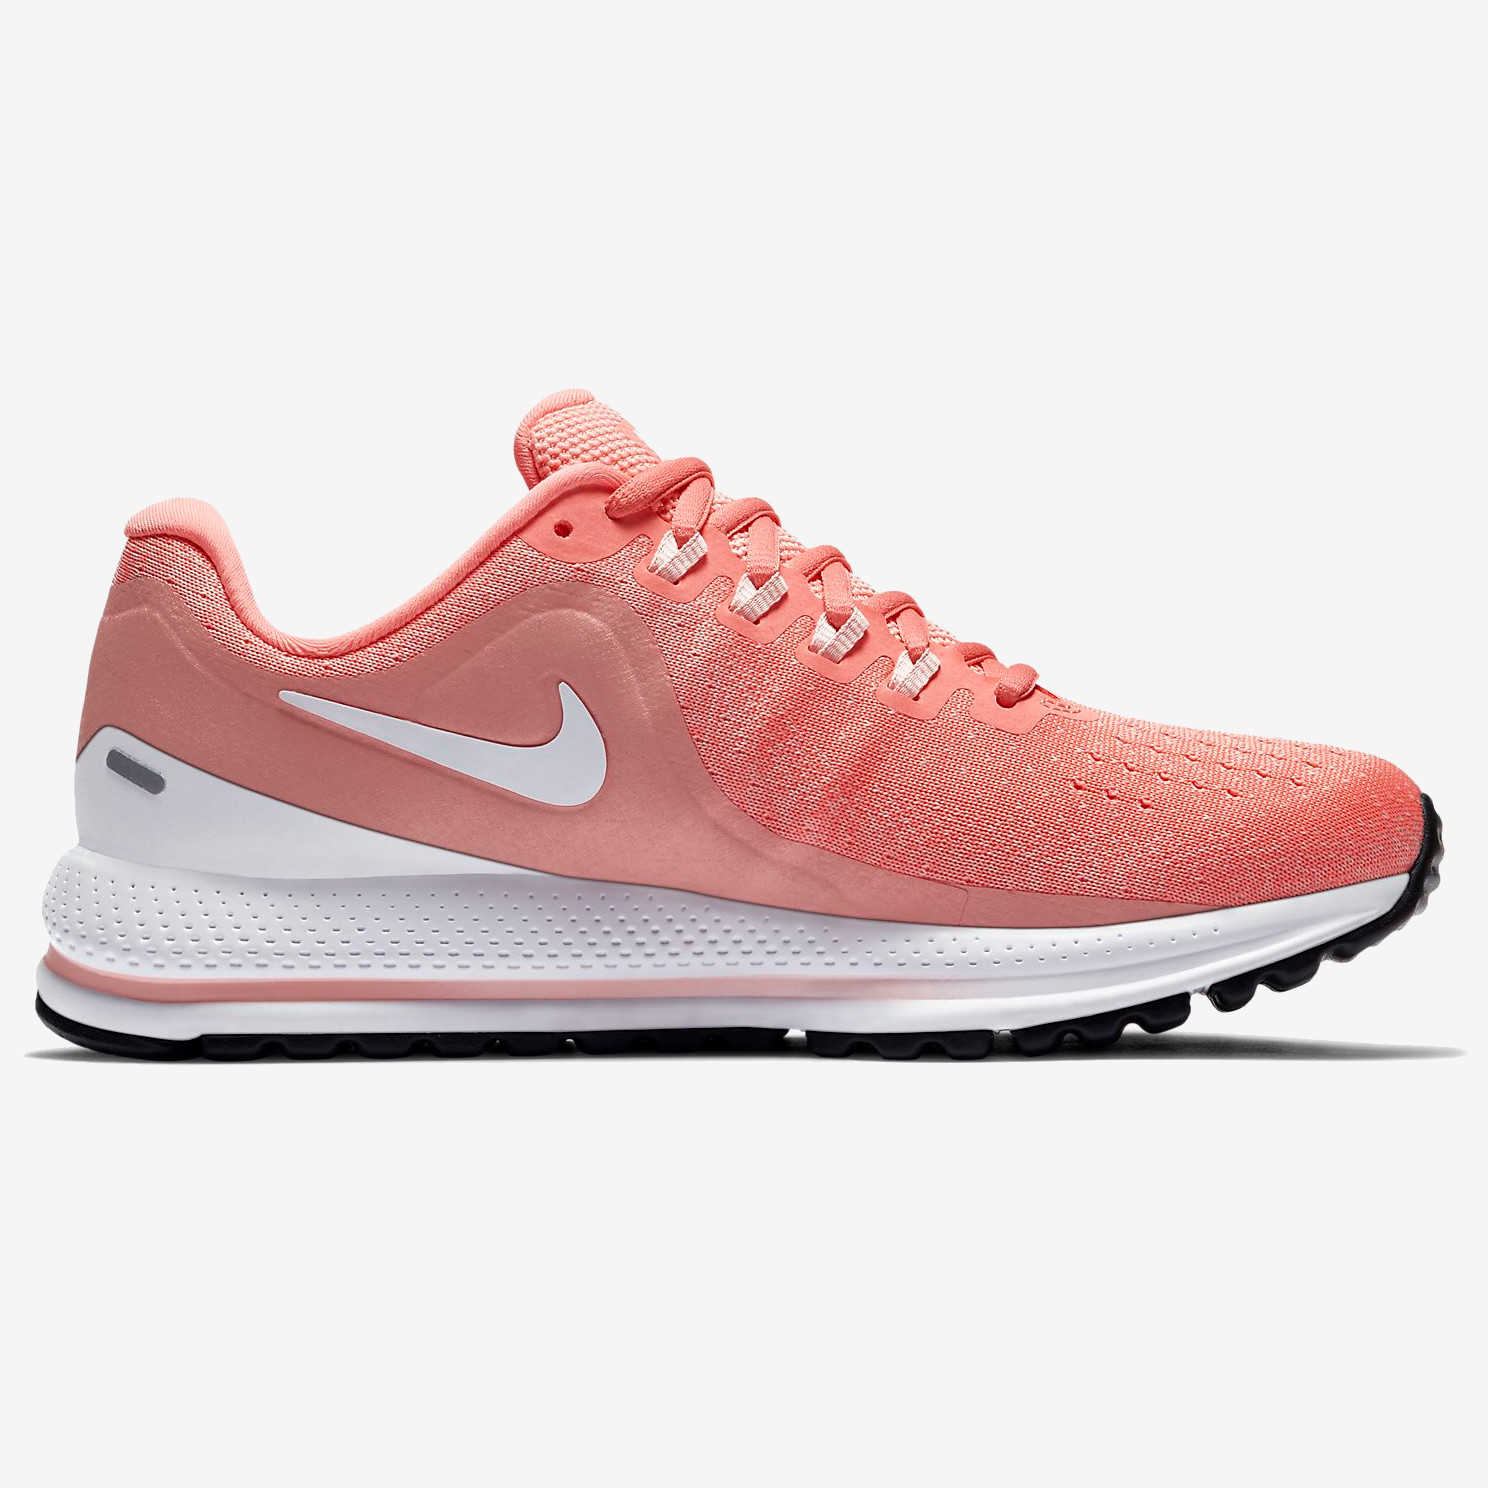 Chaussure de Running Air Zoom Vomero 13 - Light Atomic Pink White Bleached Coral